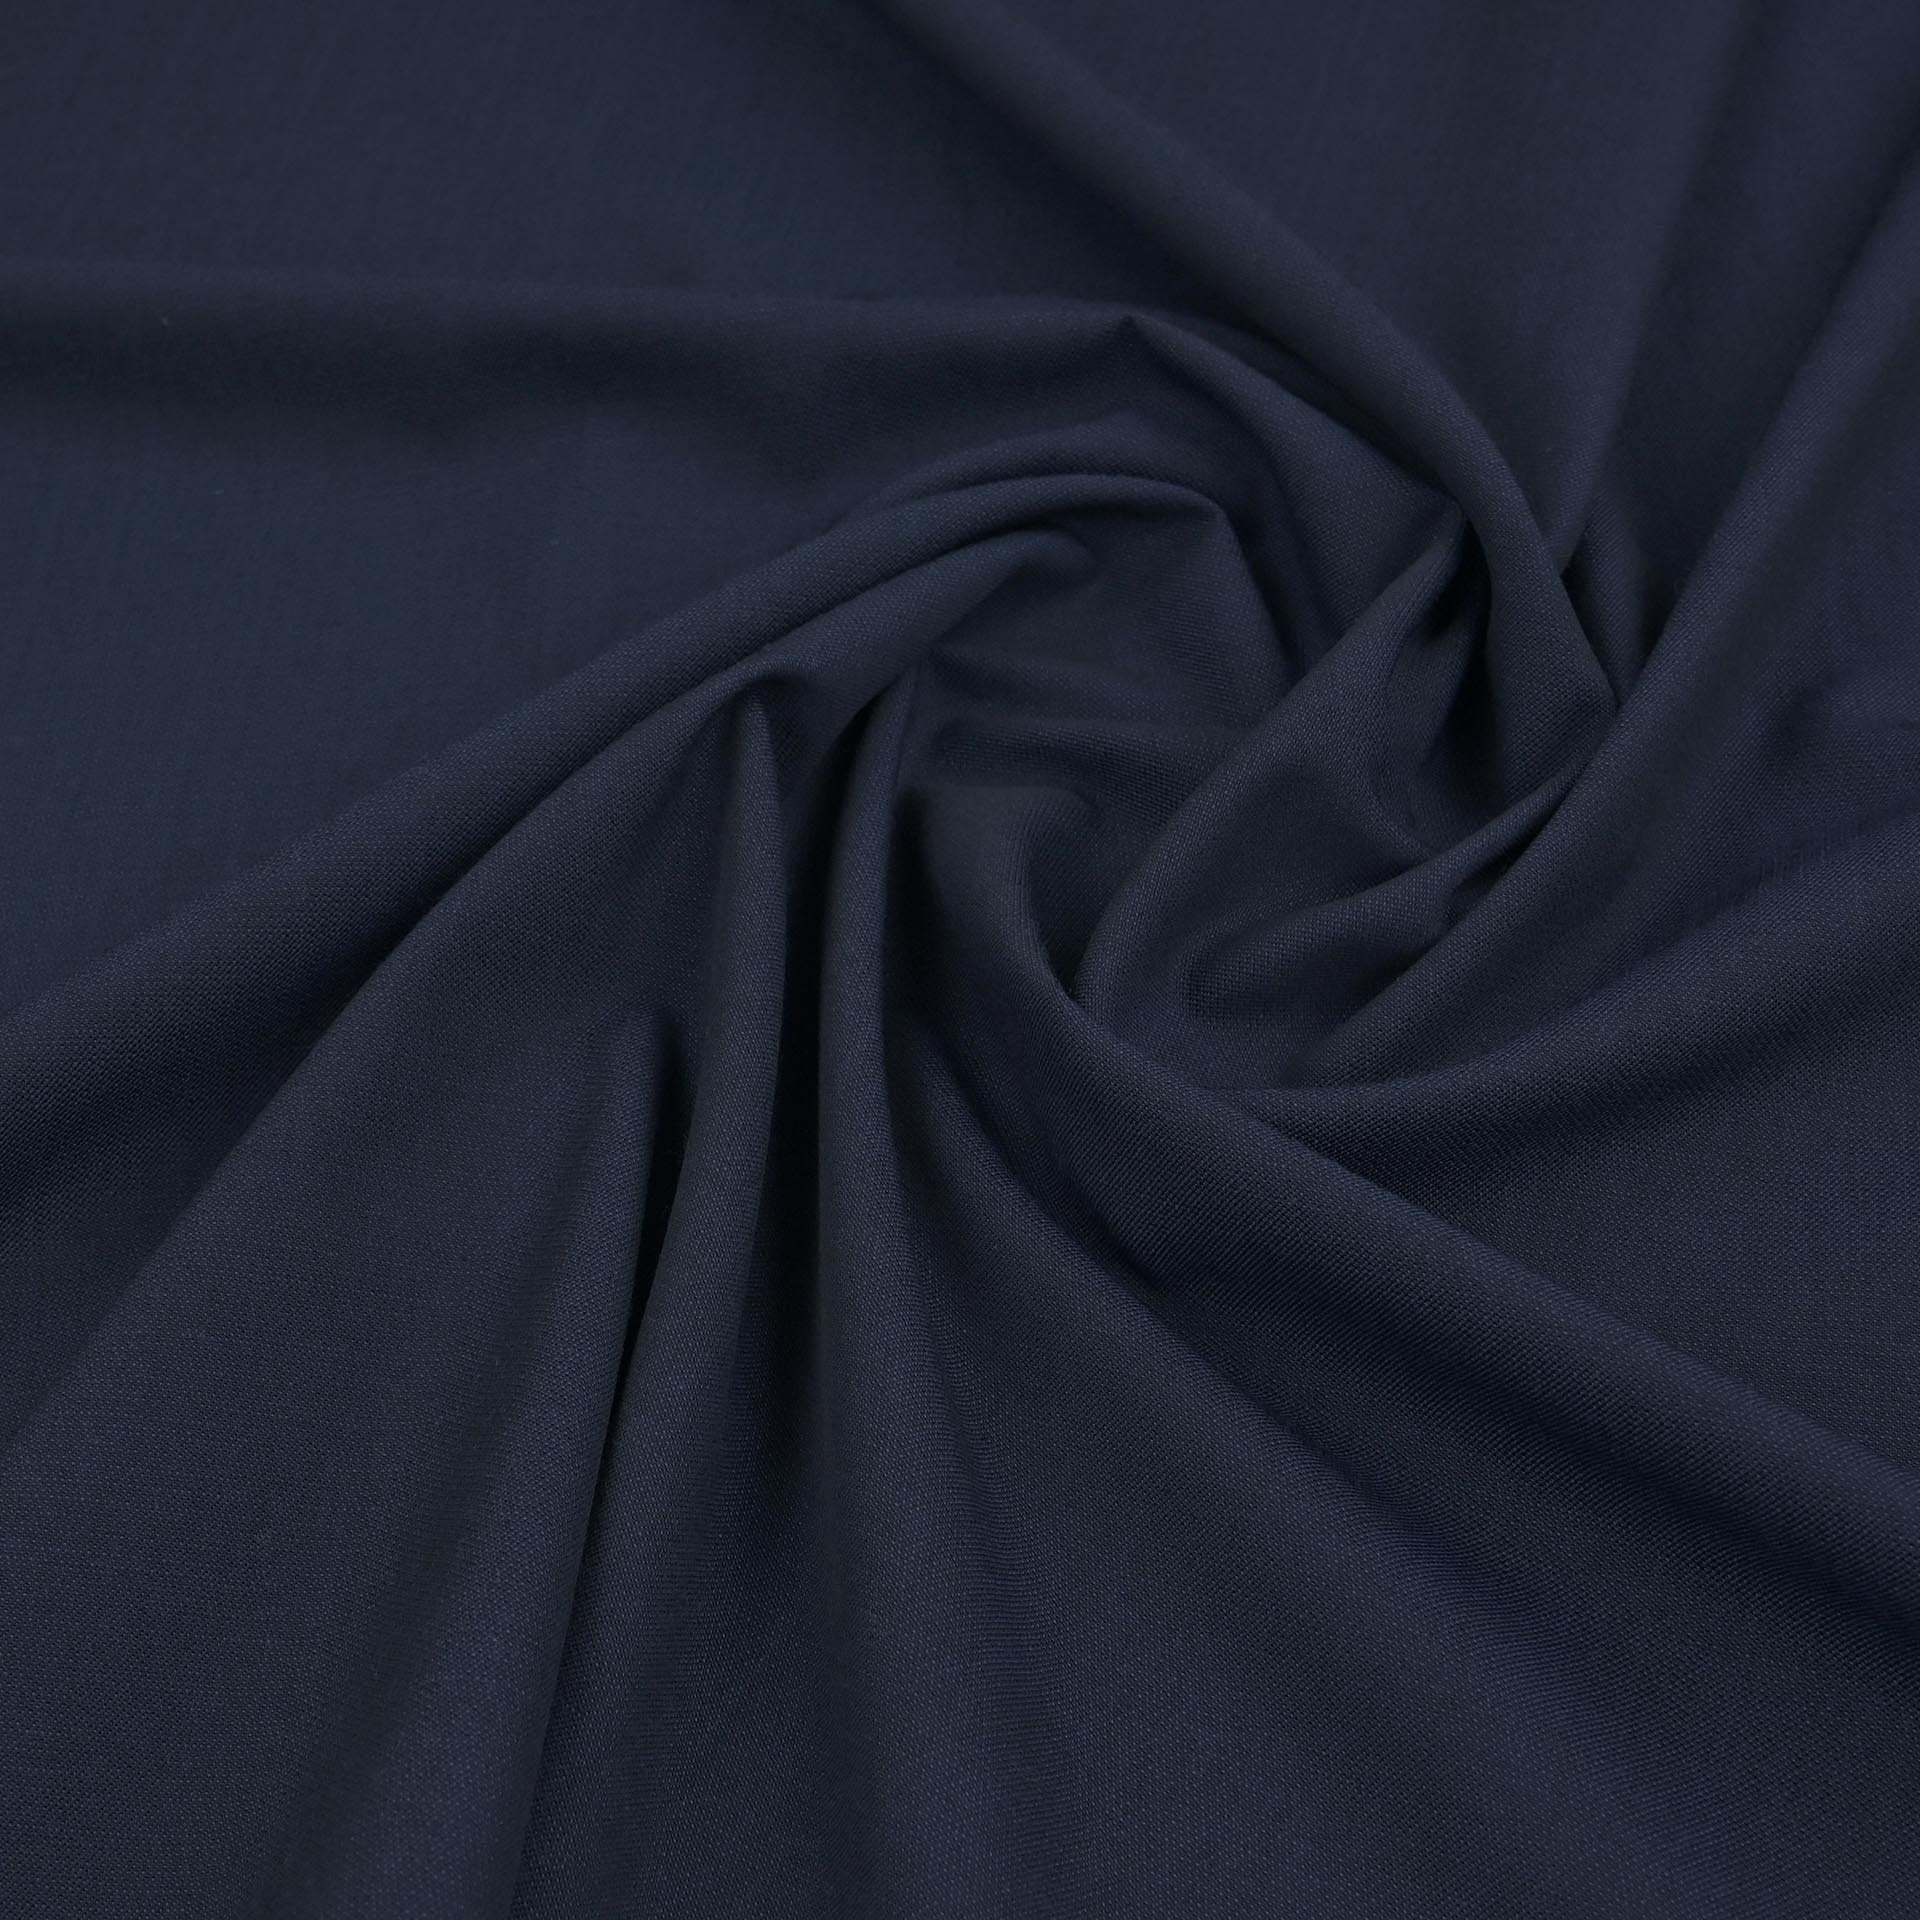 Blue Suiting Fabric 98224